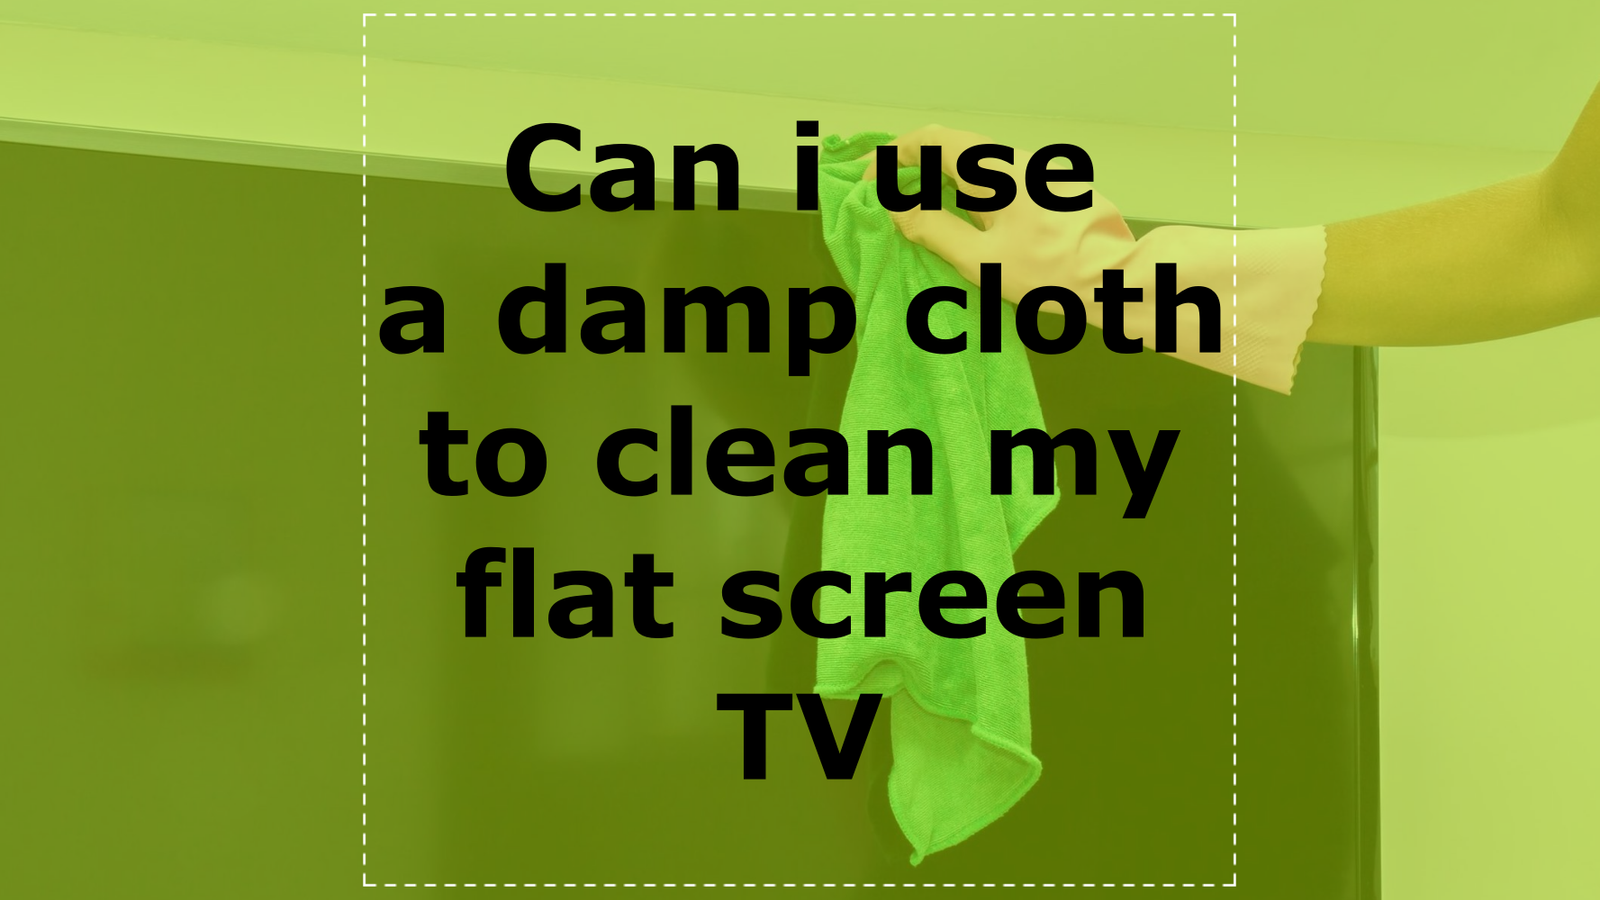 Can i use a damp cloth to clean my flat screen TV